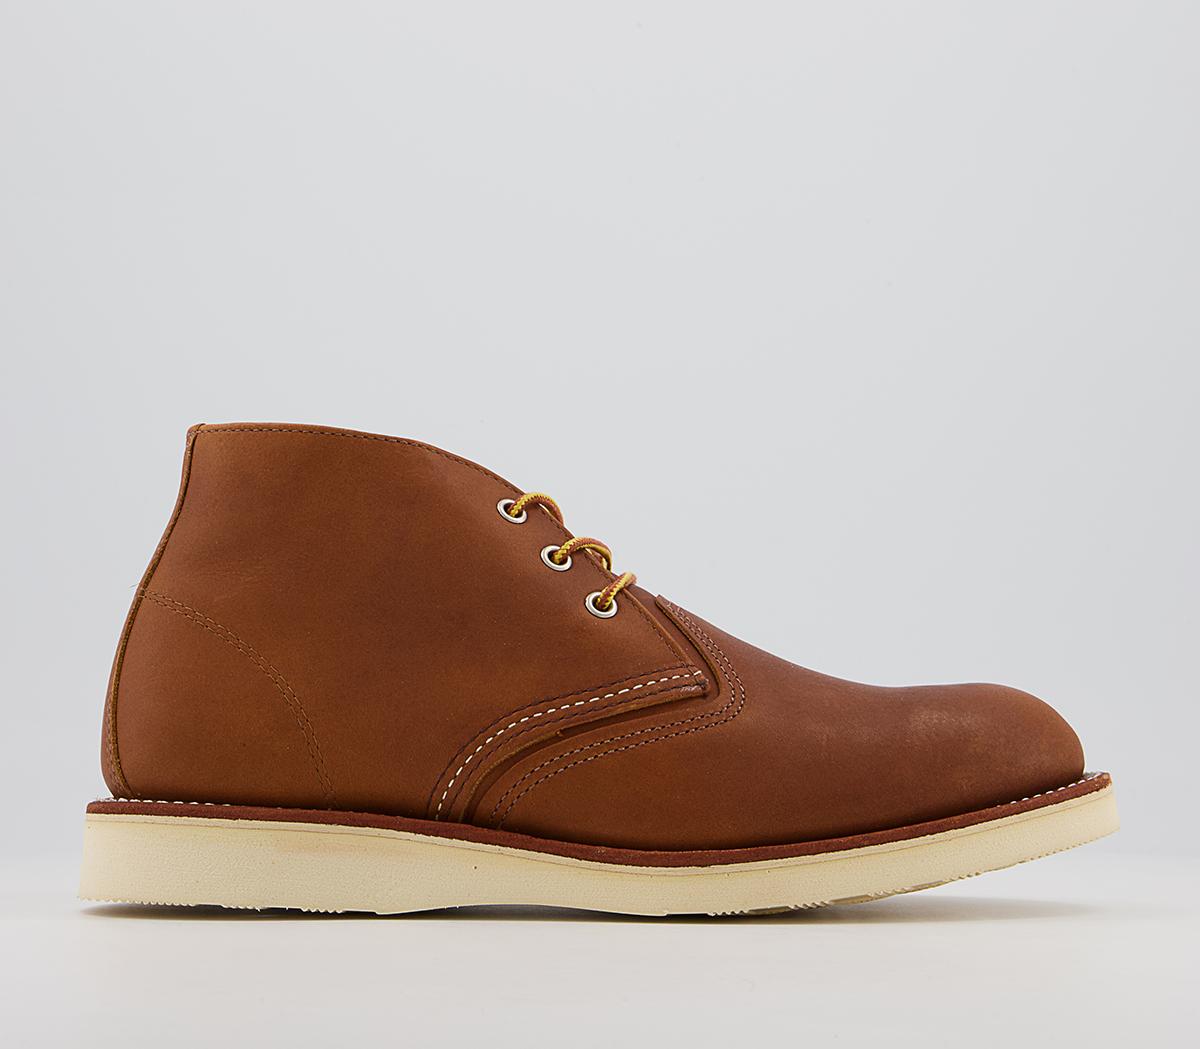 Red WingWork Chukka BootsTan Leather